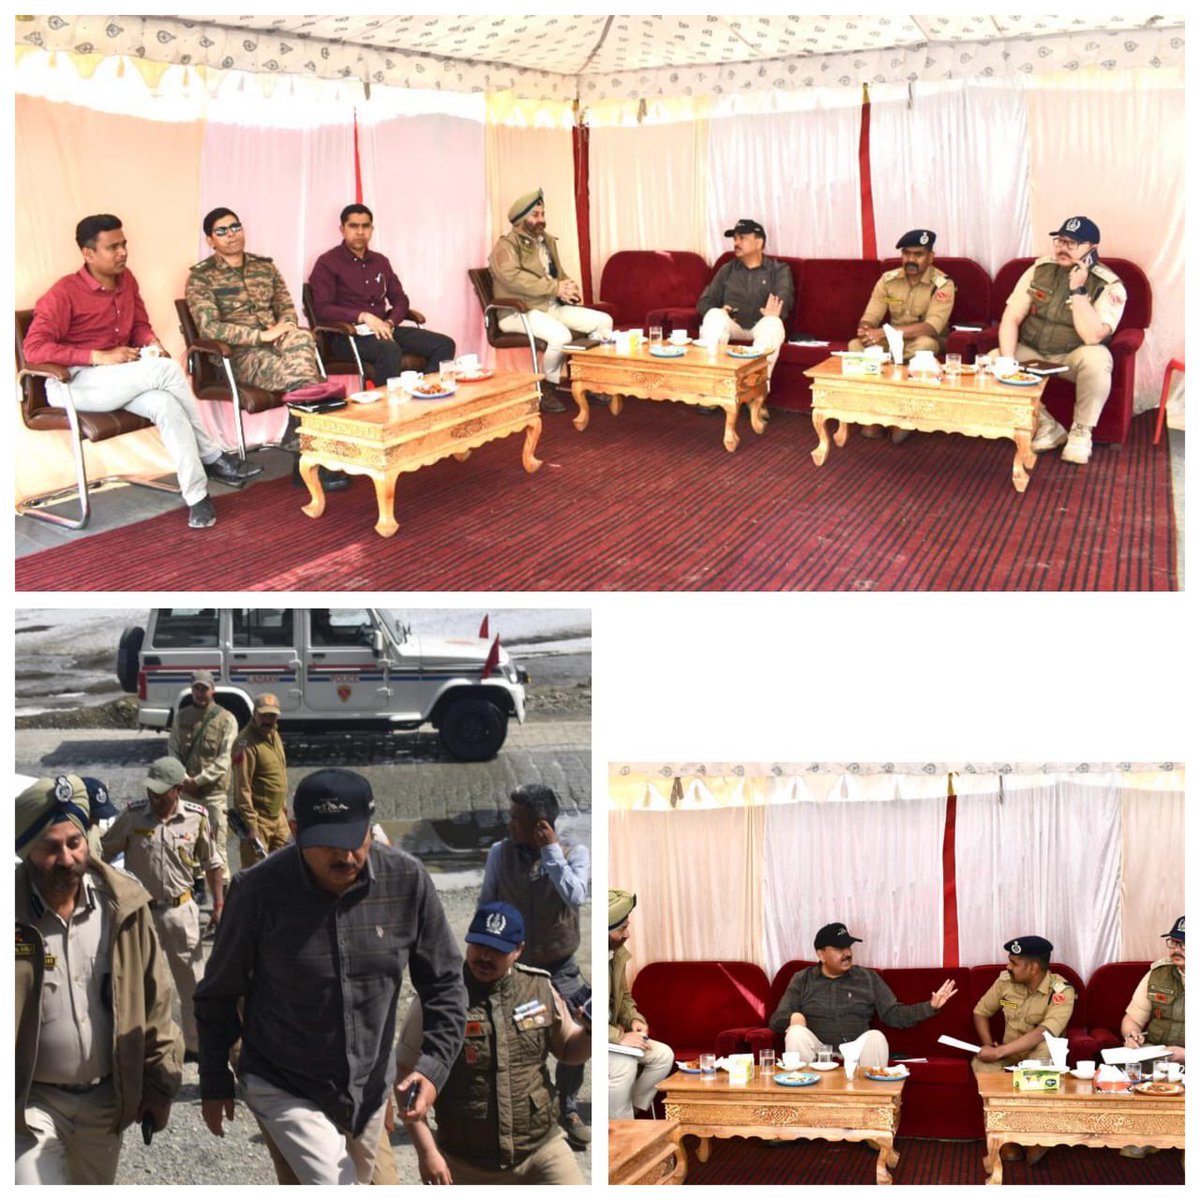 I would like to express my gratitude to ADGP #Ladakh, Dr. S.D. Singh Jamwal, IPS, for holding a productive meeting with all stakeholders on Zojila Traffic issue to improve the traffic flow between Sonamarg and Meenamarg Drass.

I am hopeful that this meeting will lead to